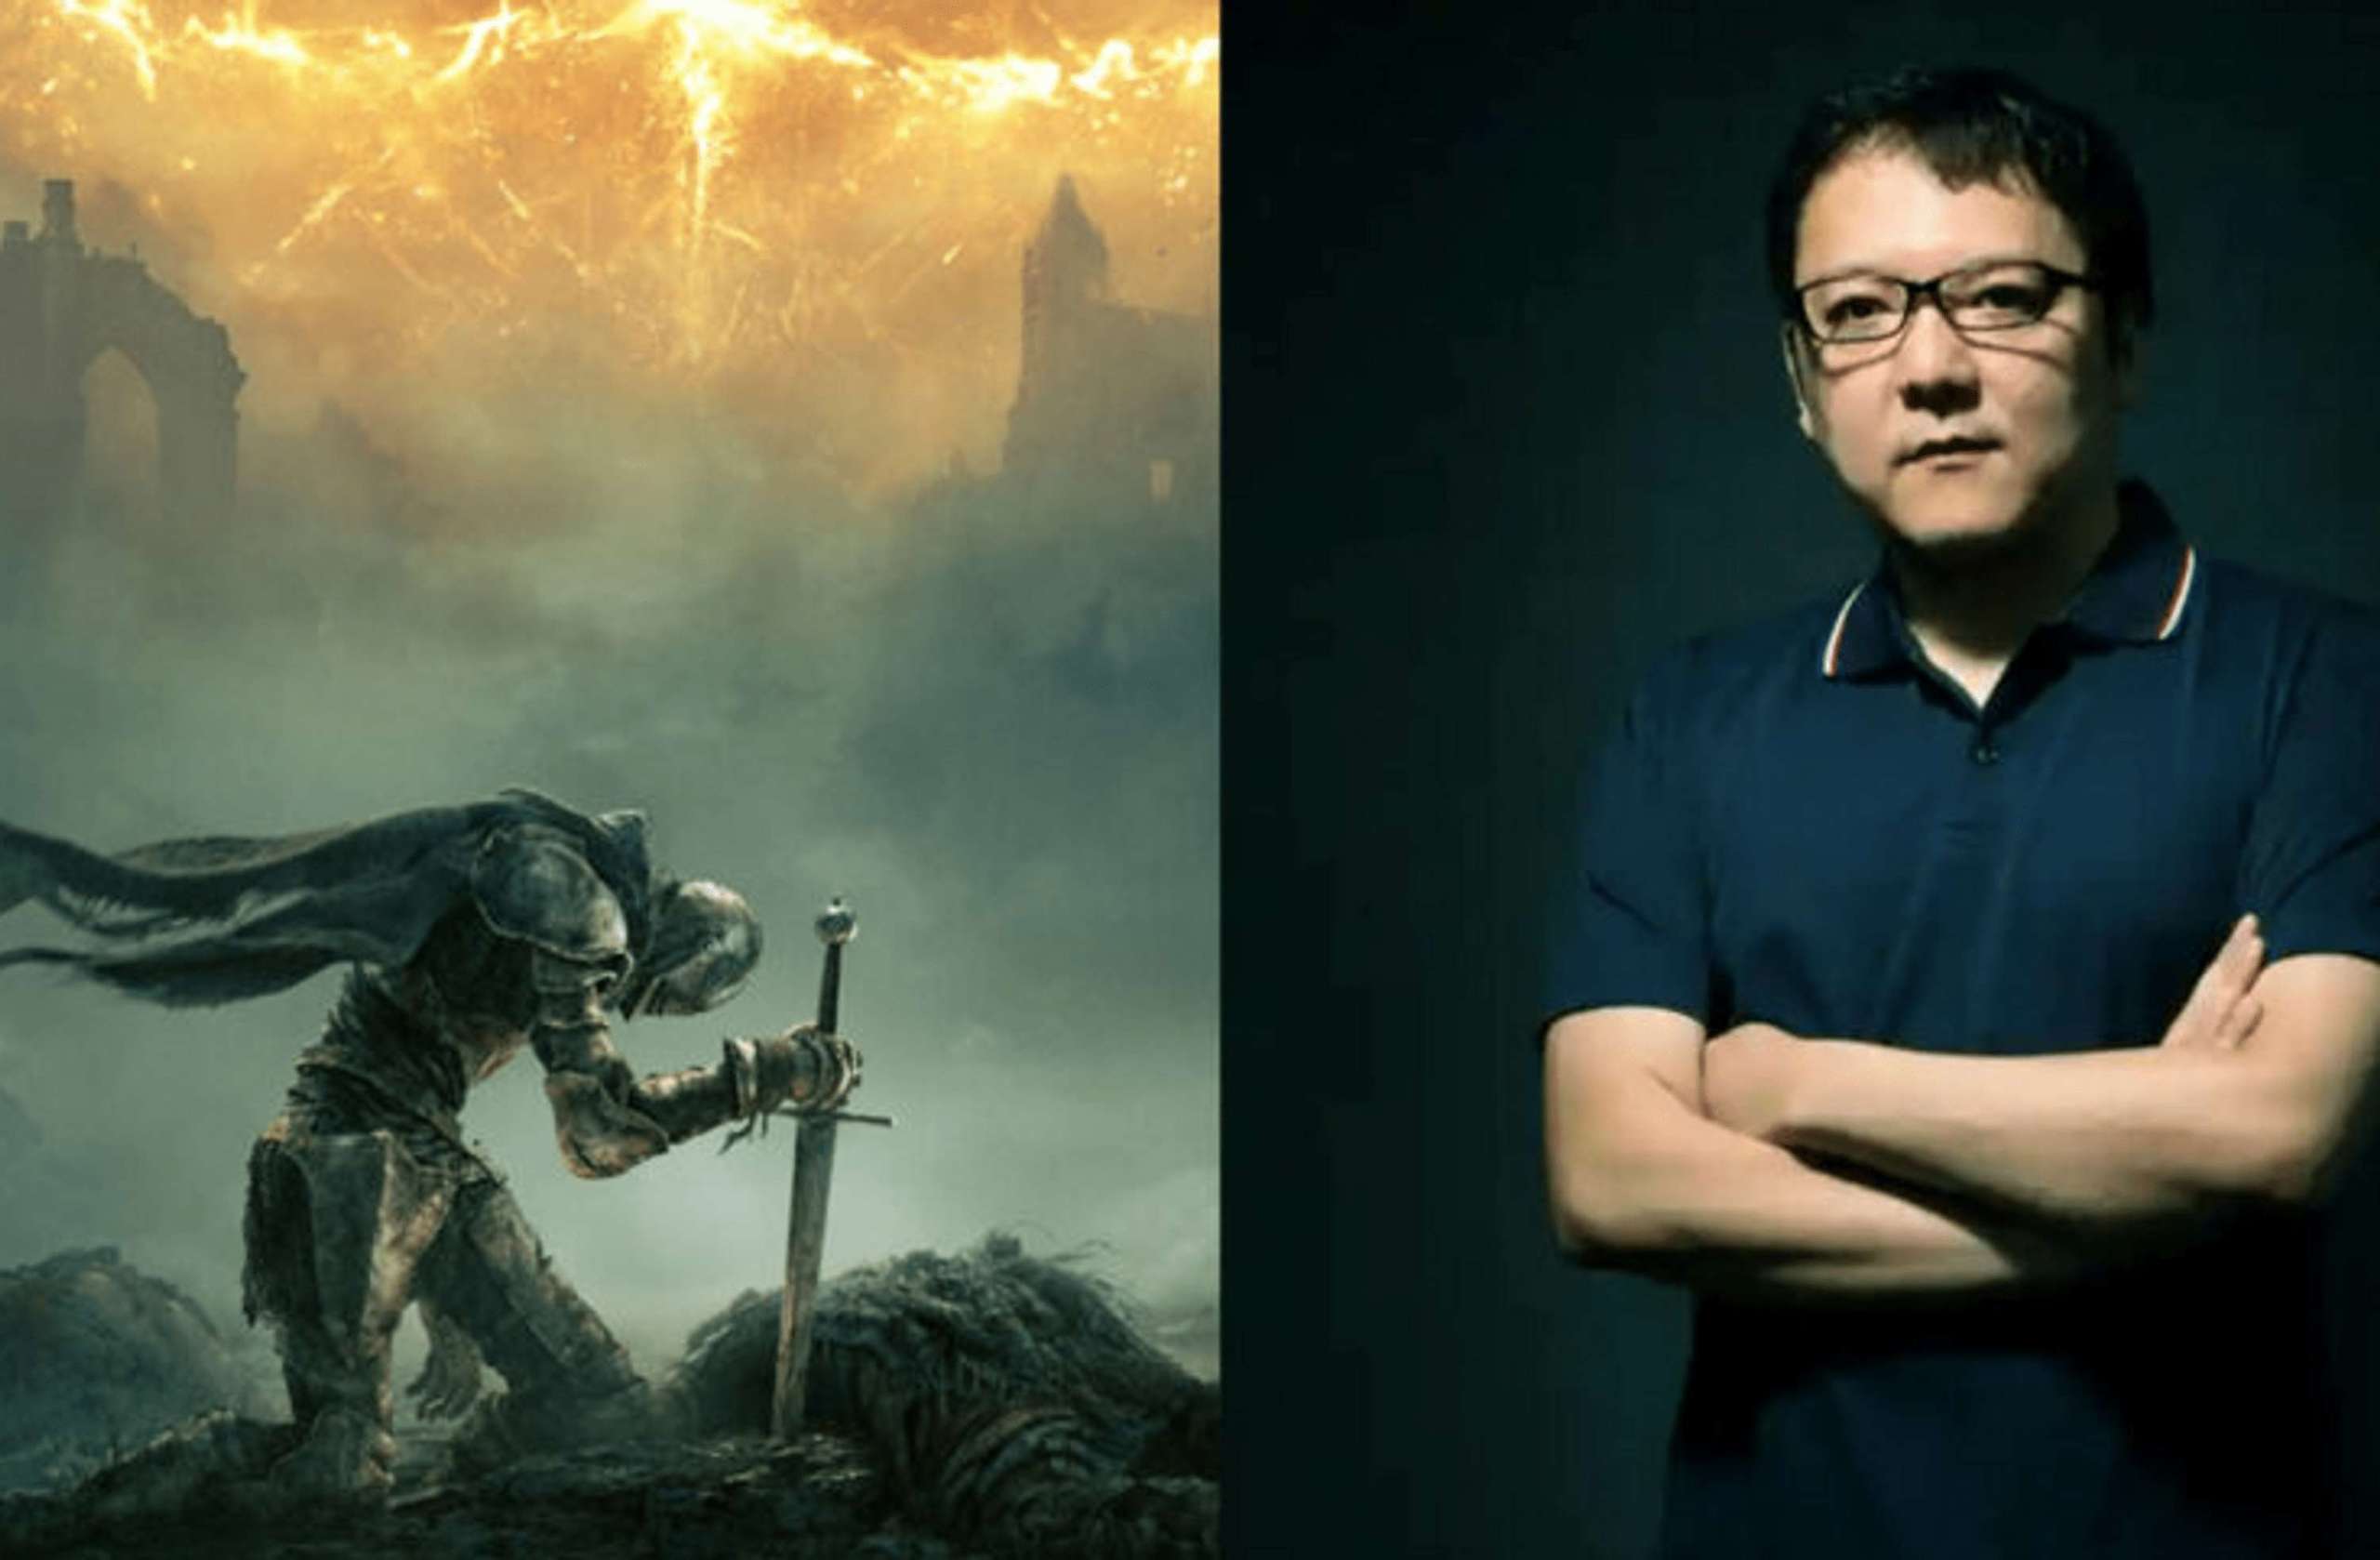 Dark Souls And Elden Ring Creator Hidetaka Miyazaki Will Be Honoured With A Game Industry Achievement Award At The CEDEC Awards